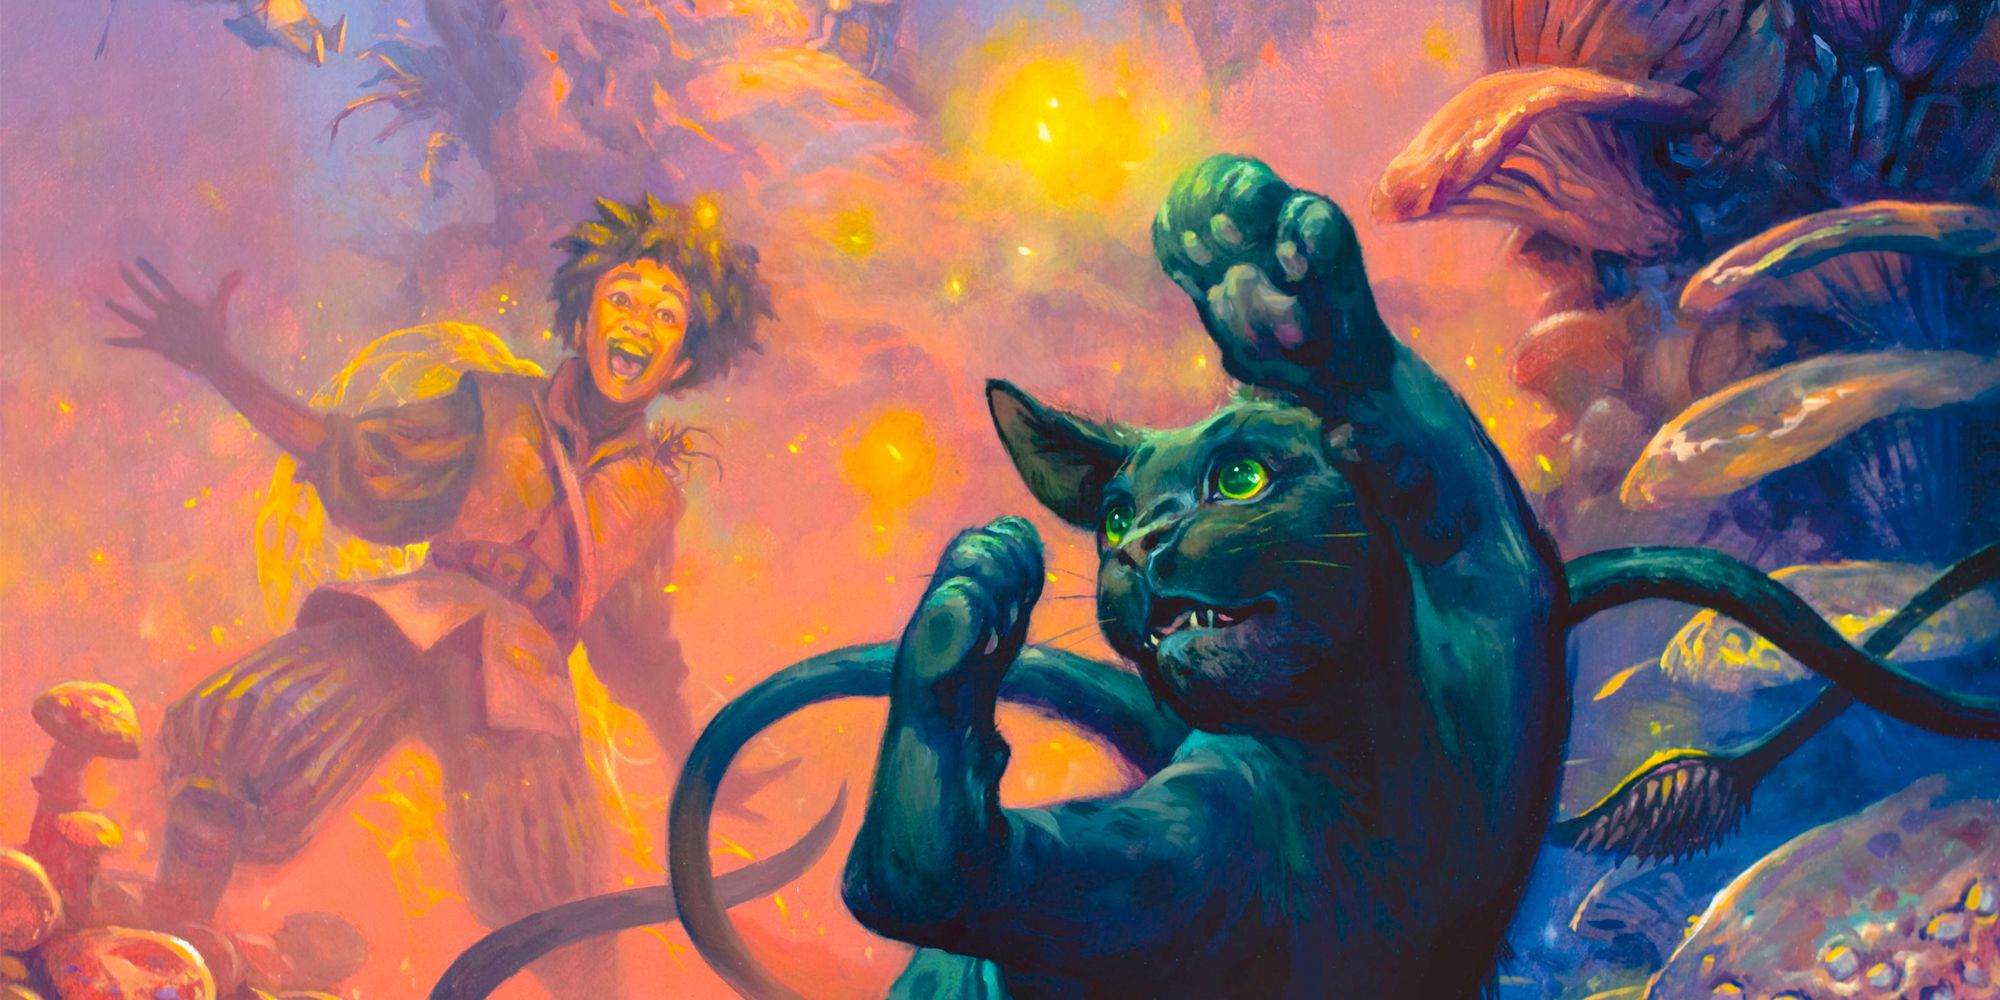 A displacer beast catches fireflies in the Feywild